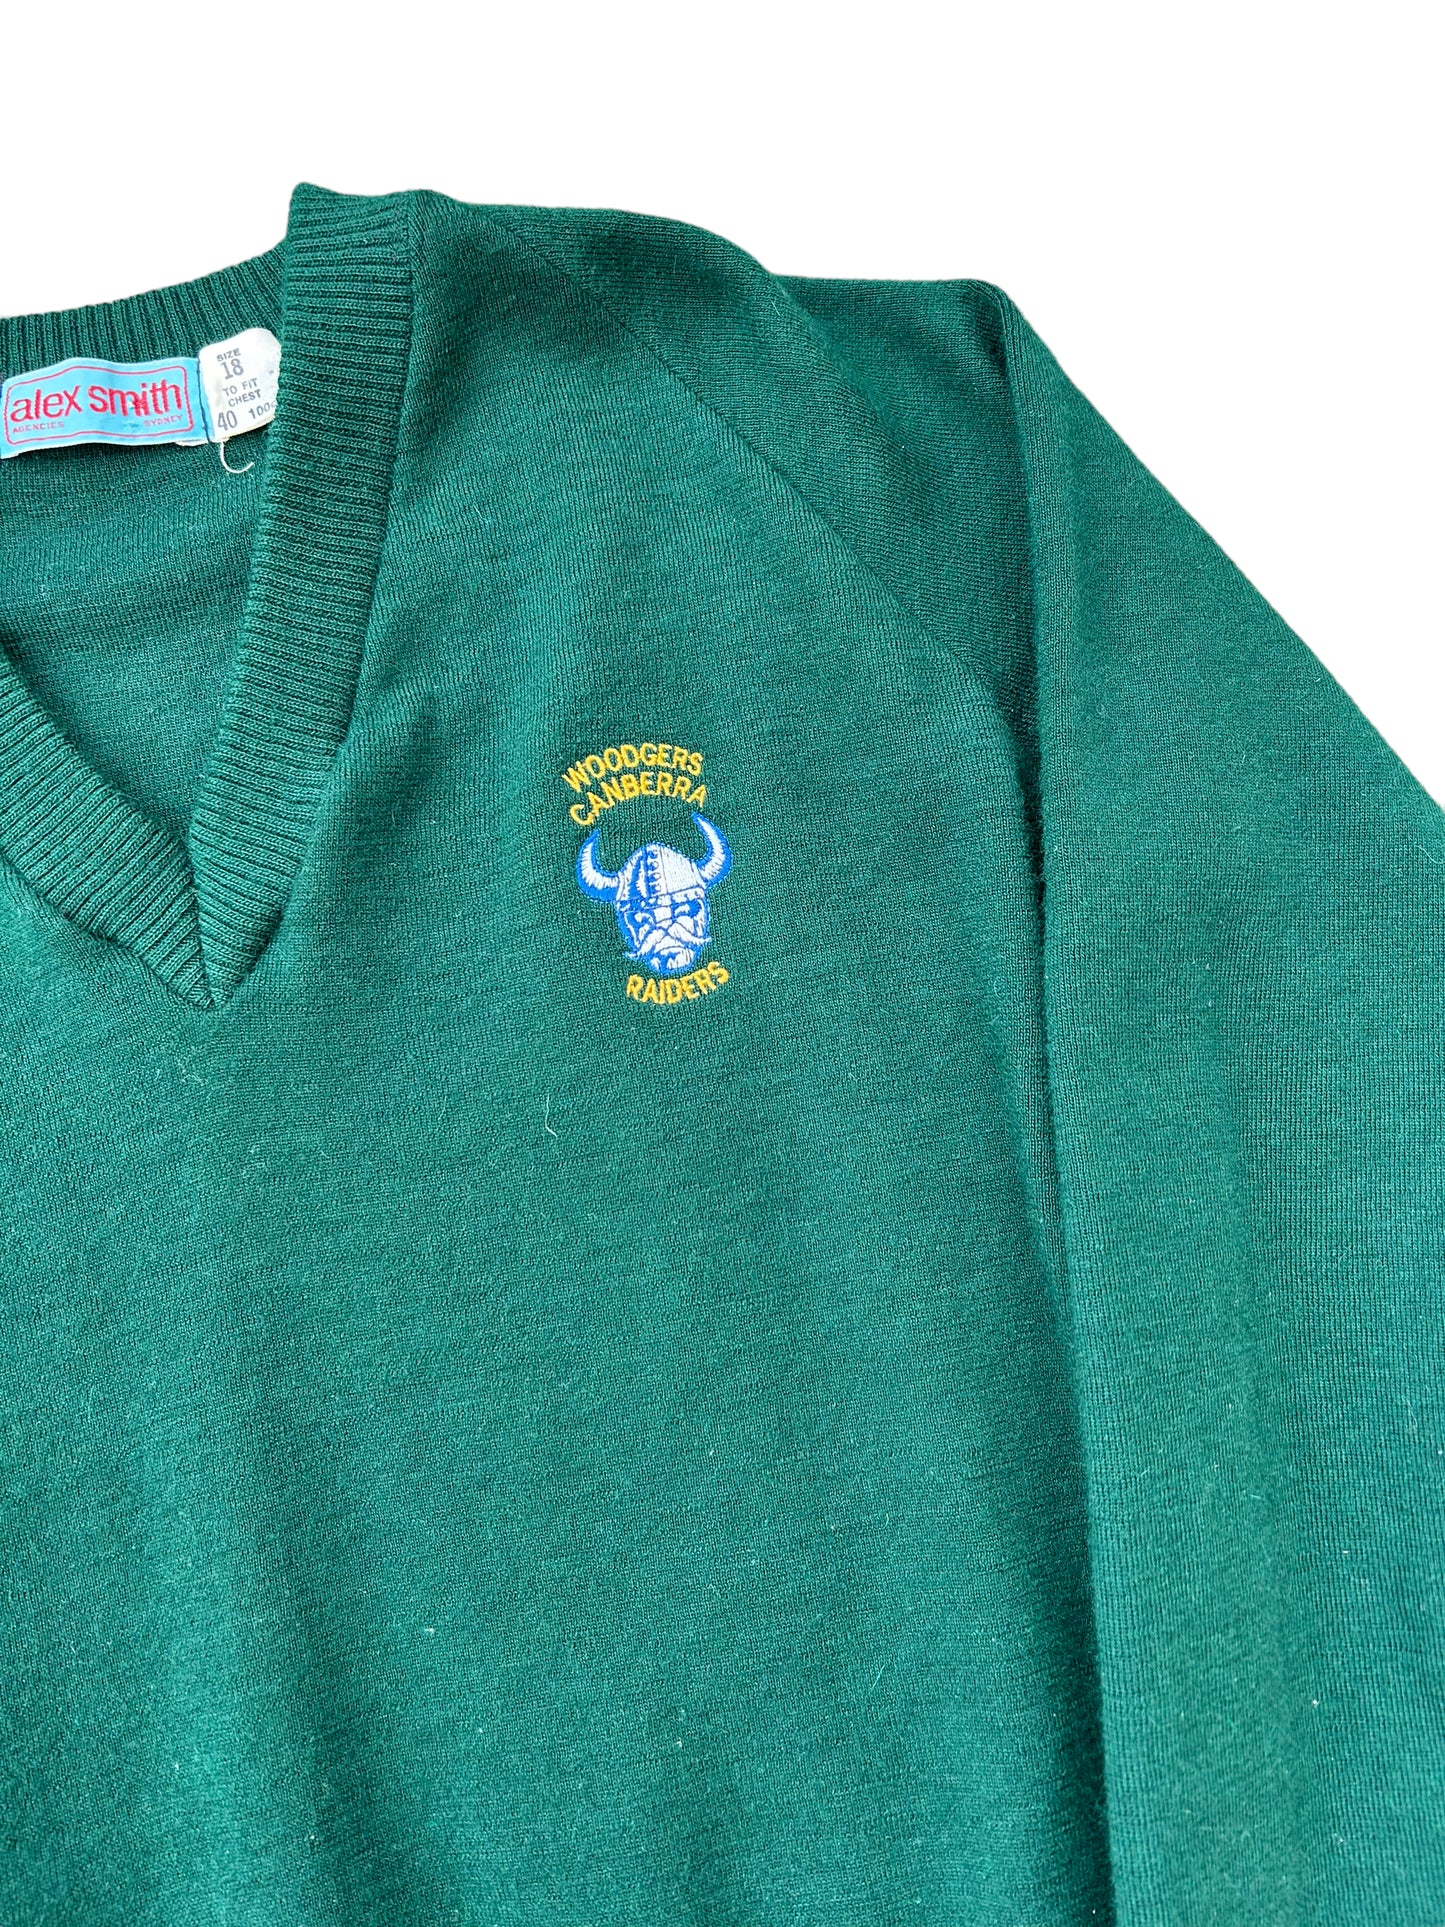 1989 Canberra Raiders Knit Sweater